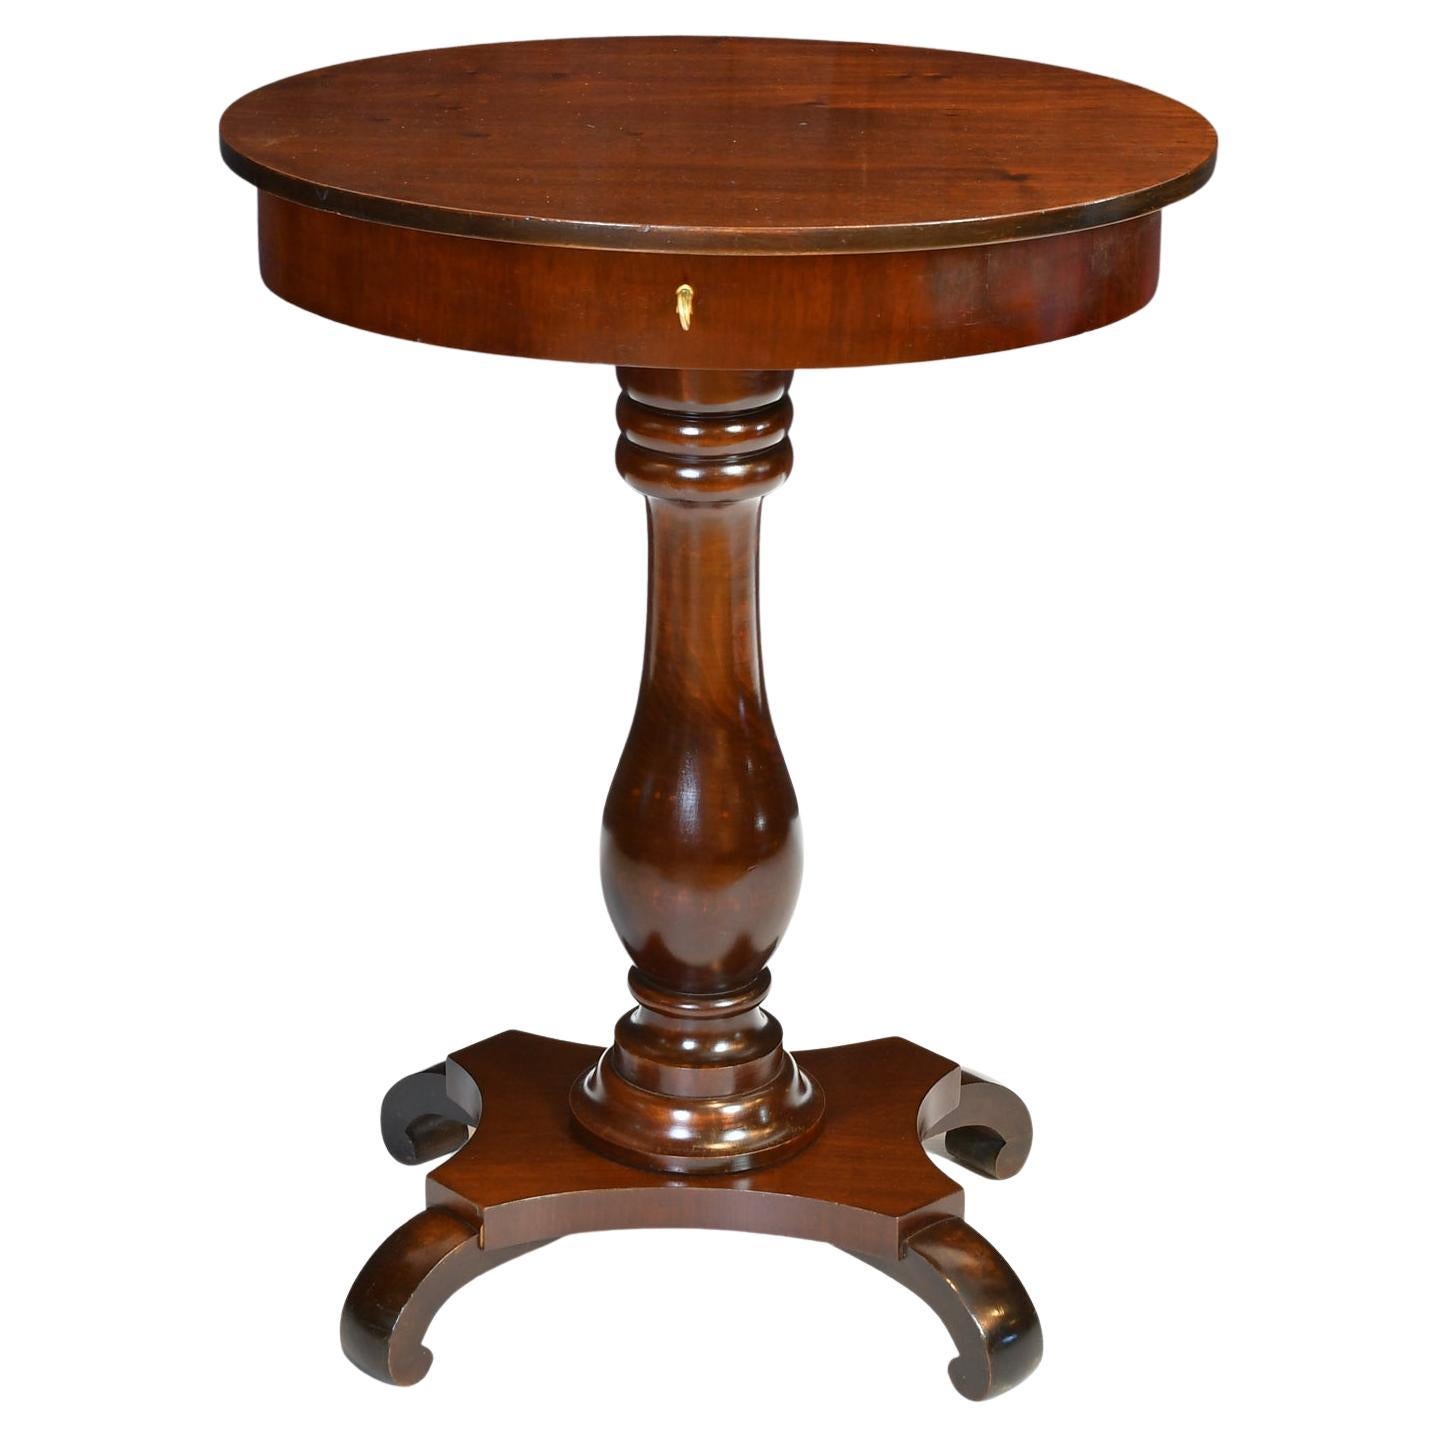 Small Antique Oval Pedestal Table or Work Table in Dark-Stained Mahogany For Sale